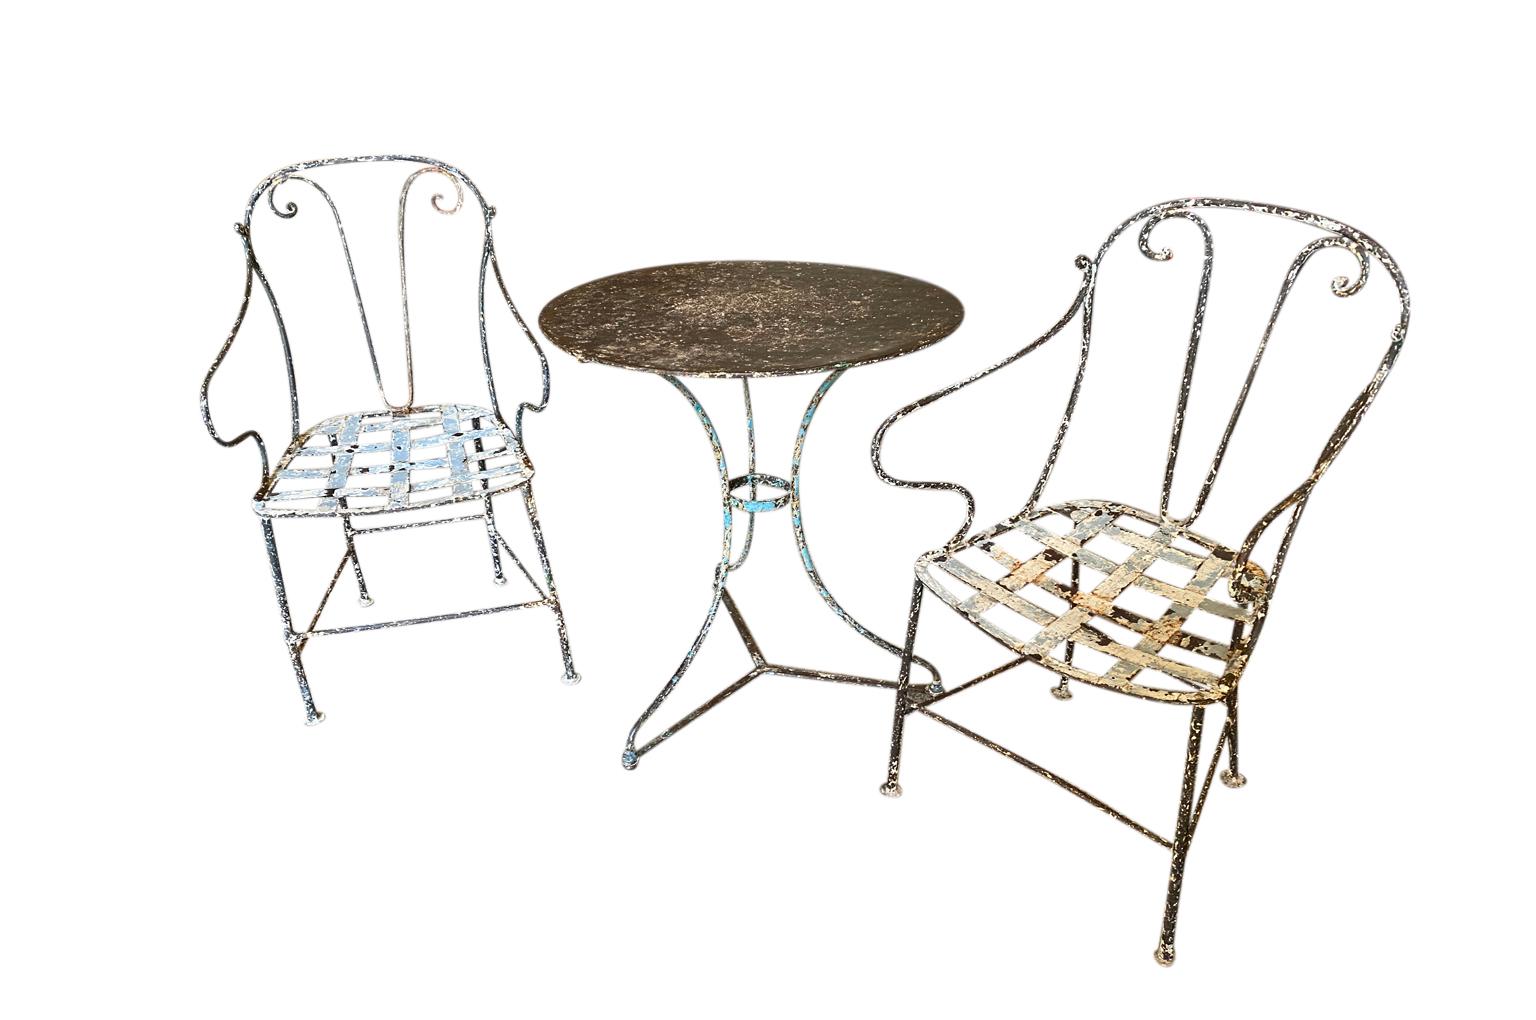 A very charming set of 19th century garden table & armchairs from the Provence region of France. Wonderfully made from painted iron. Super patina. Perfect for a casual interior or garden. The table measures 27 1/2